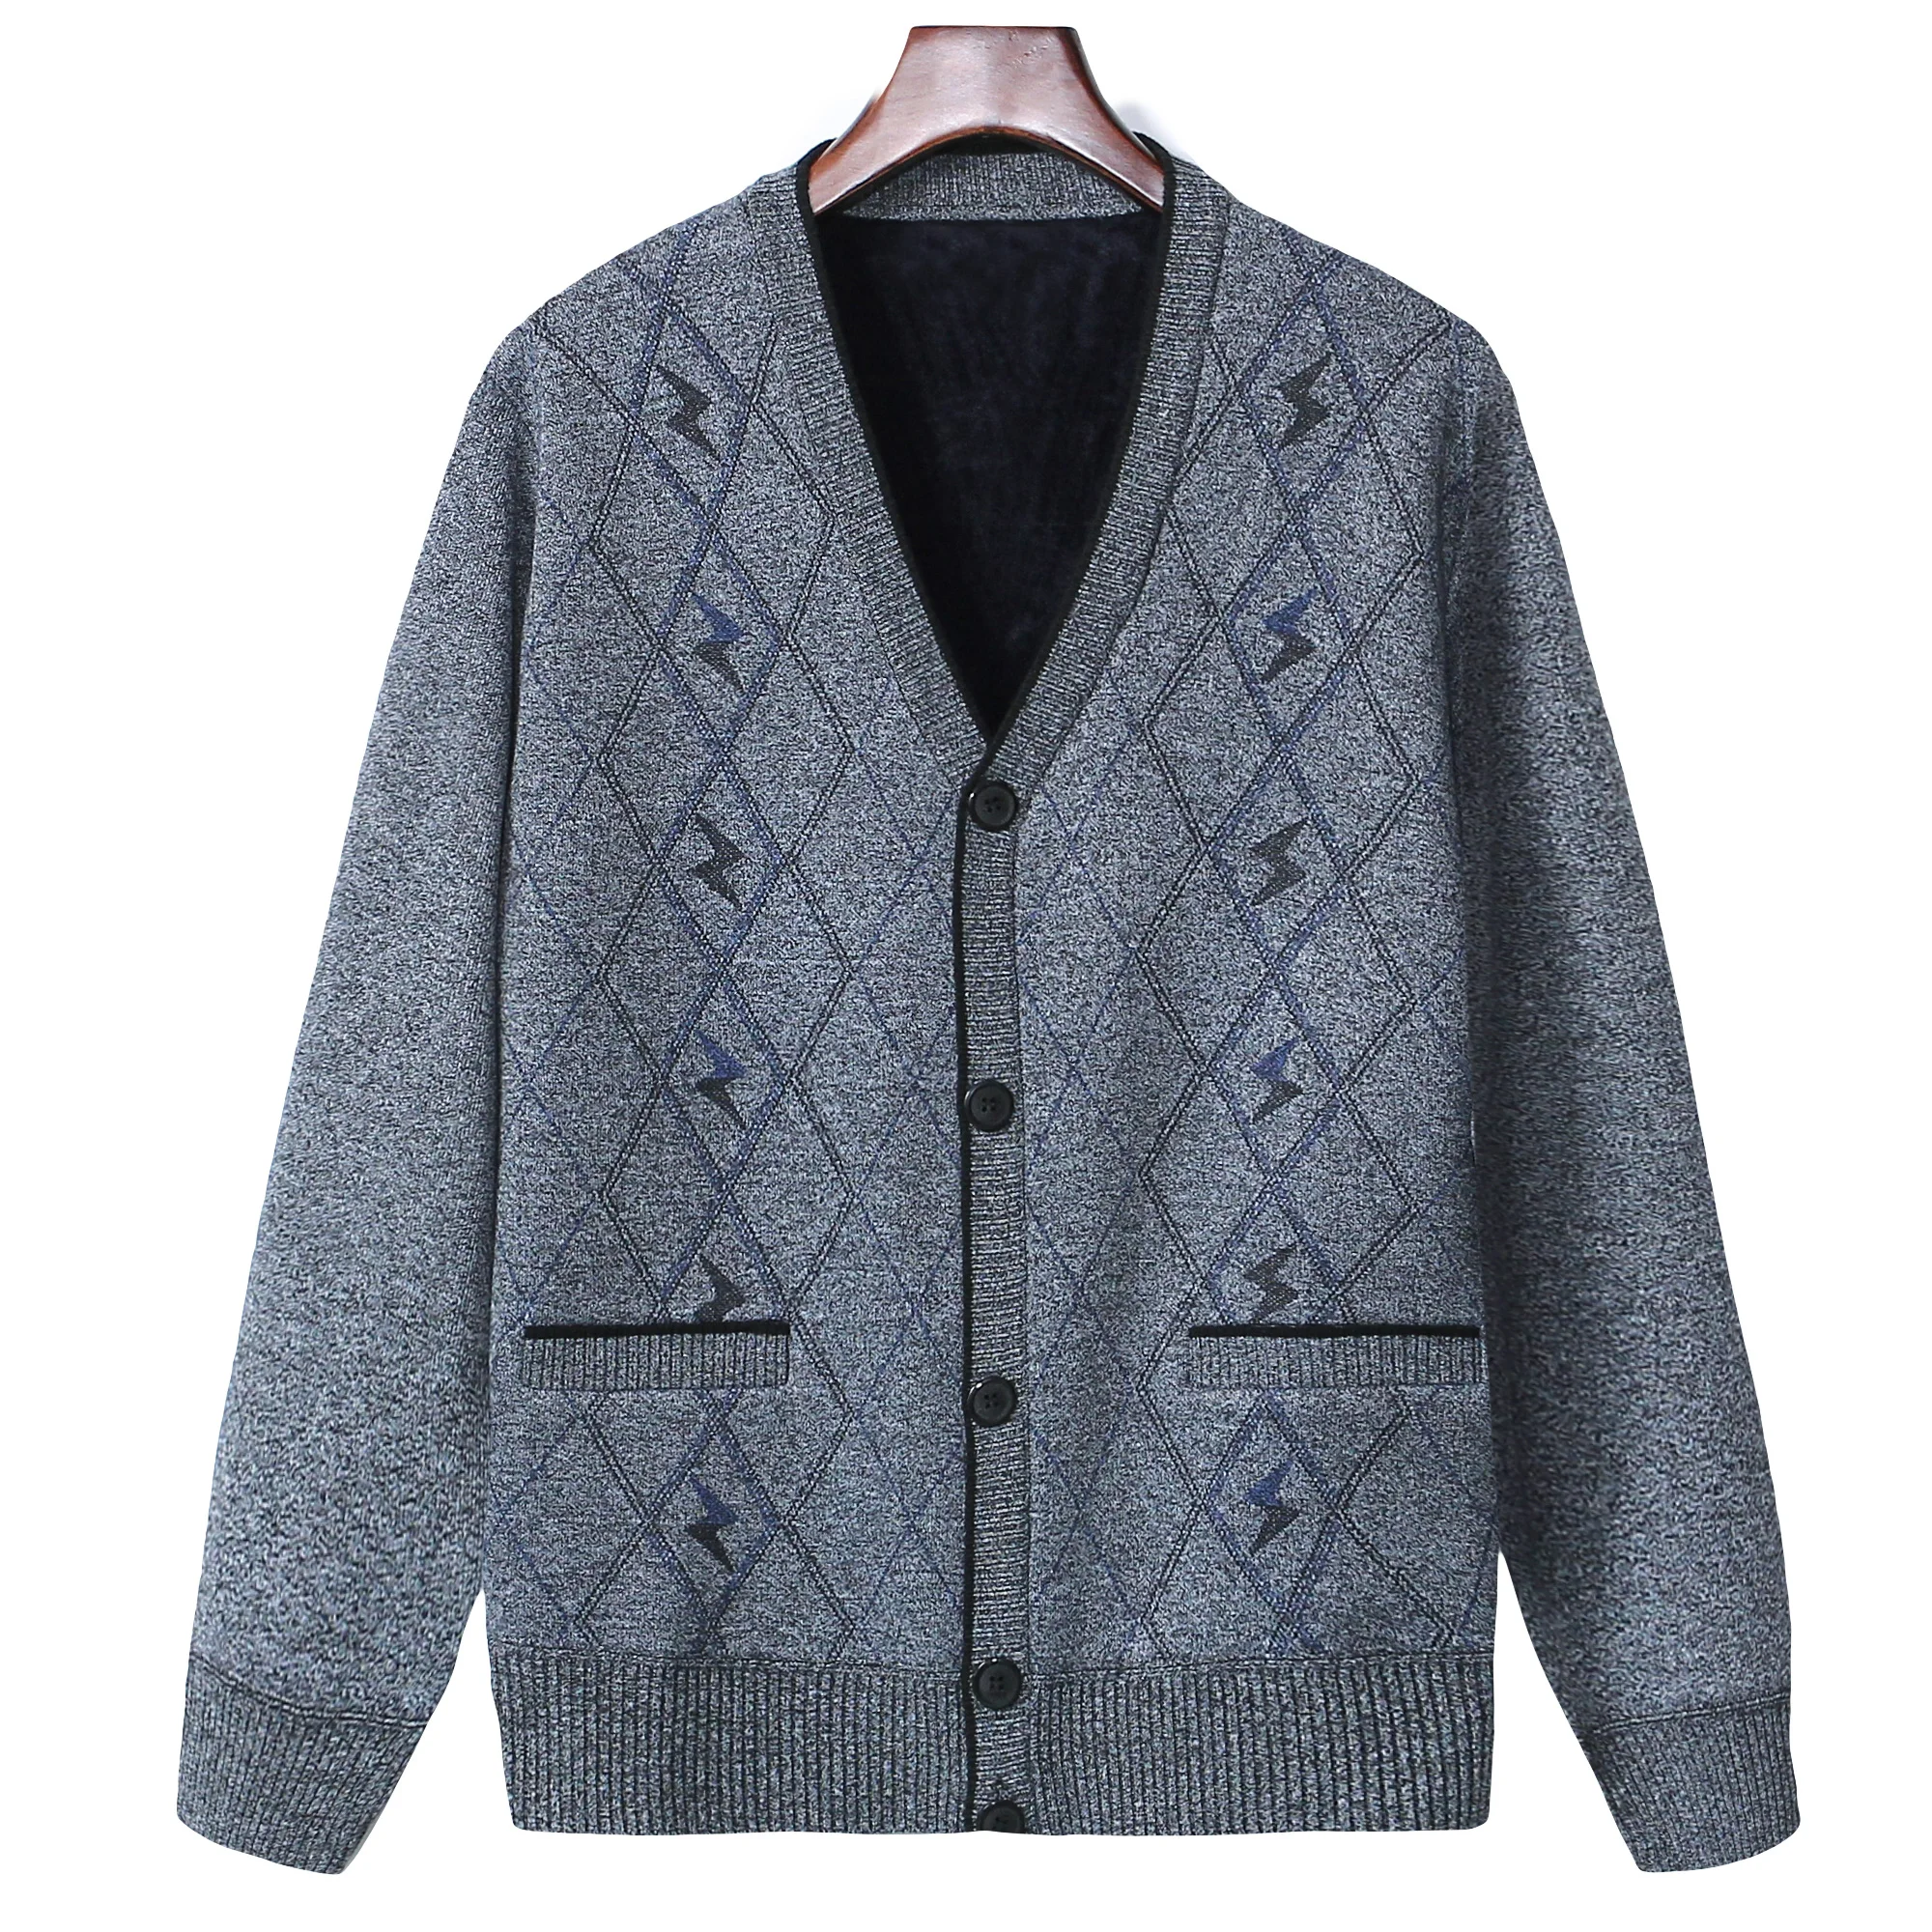 Autumn winter Sweater for Man Button Cardigan Middle-aged Elderly Plus Cashmere Warm V-neck Fleece Warm Knitted Hombre Cold Coat mother autumn sweater coat new middle aged and elderly women autumn and winter knitted cardigan western style coat wo piece suit